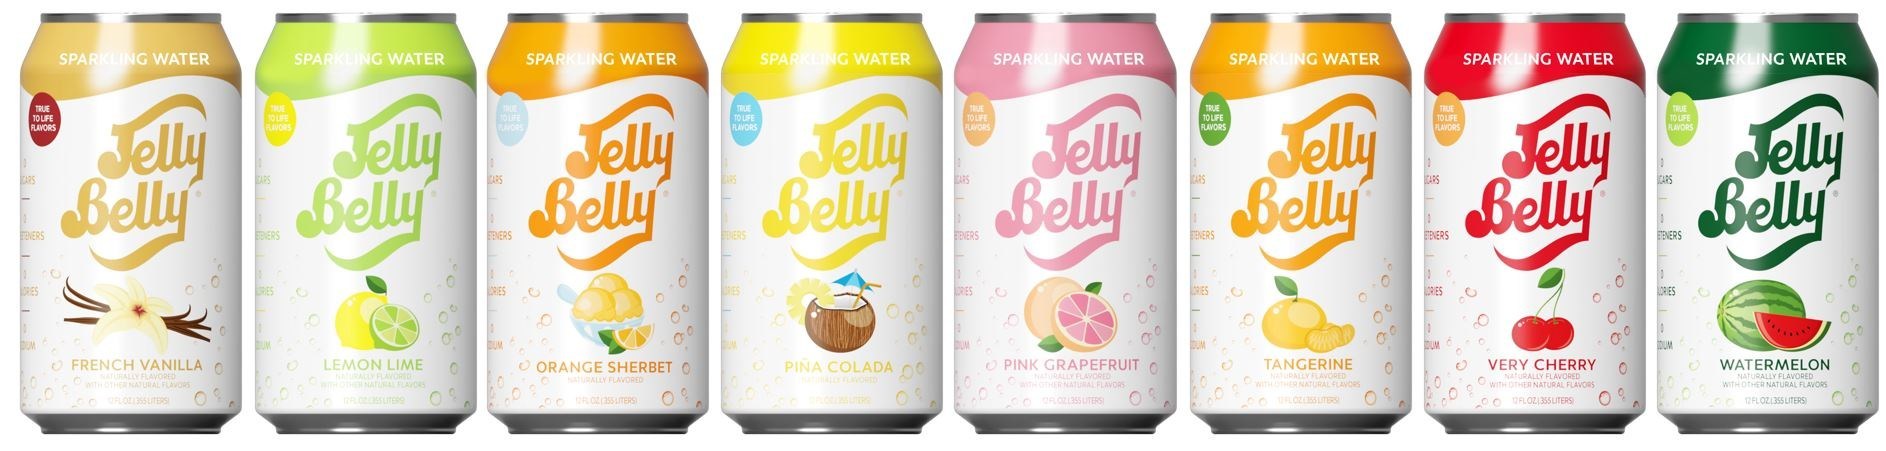 Jelly Belly Sparkling Water - HD Wallpaper 